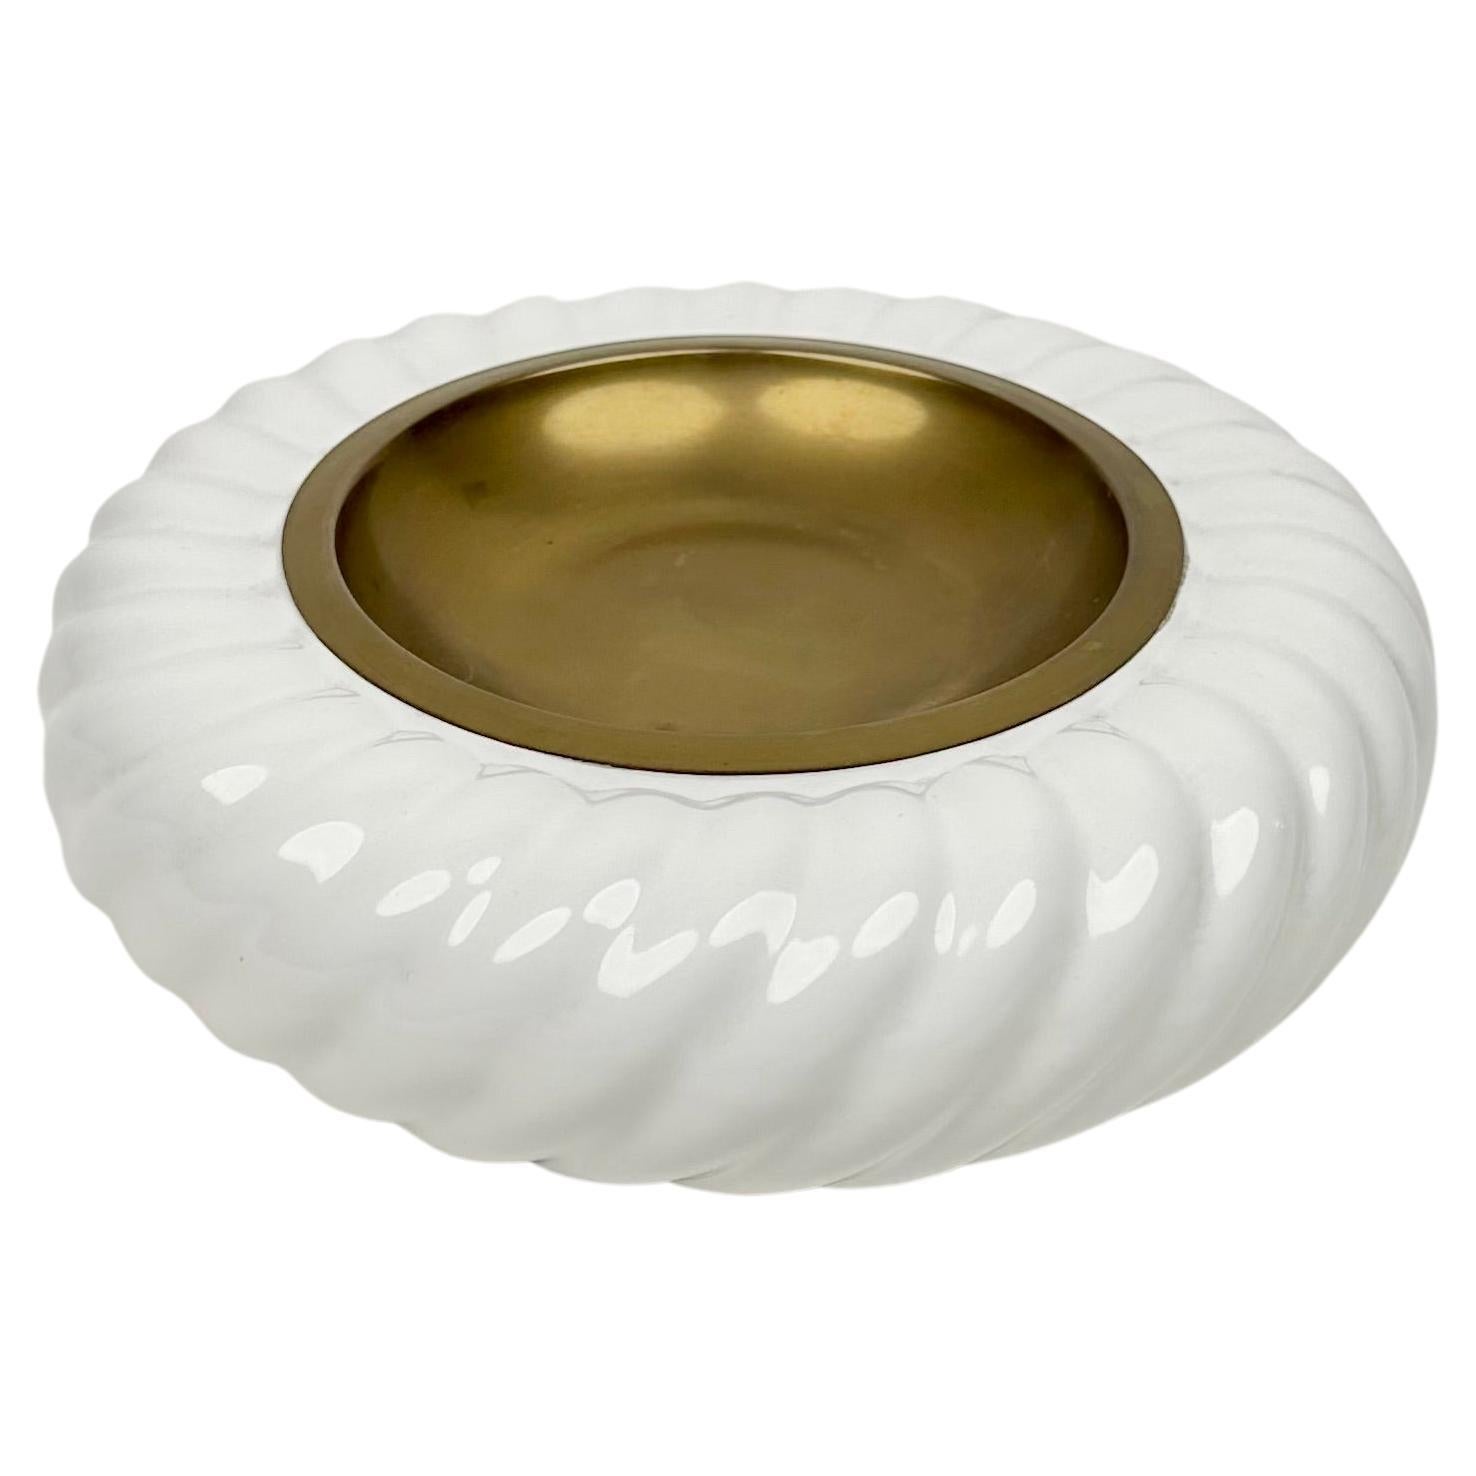 Vide-Poche or Ashtray White Ceramic and Brass by Tommaso Barbi, Italy 1970s